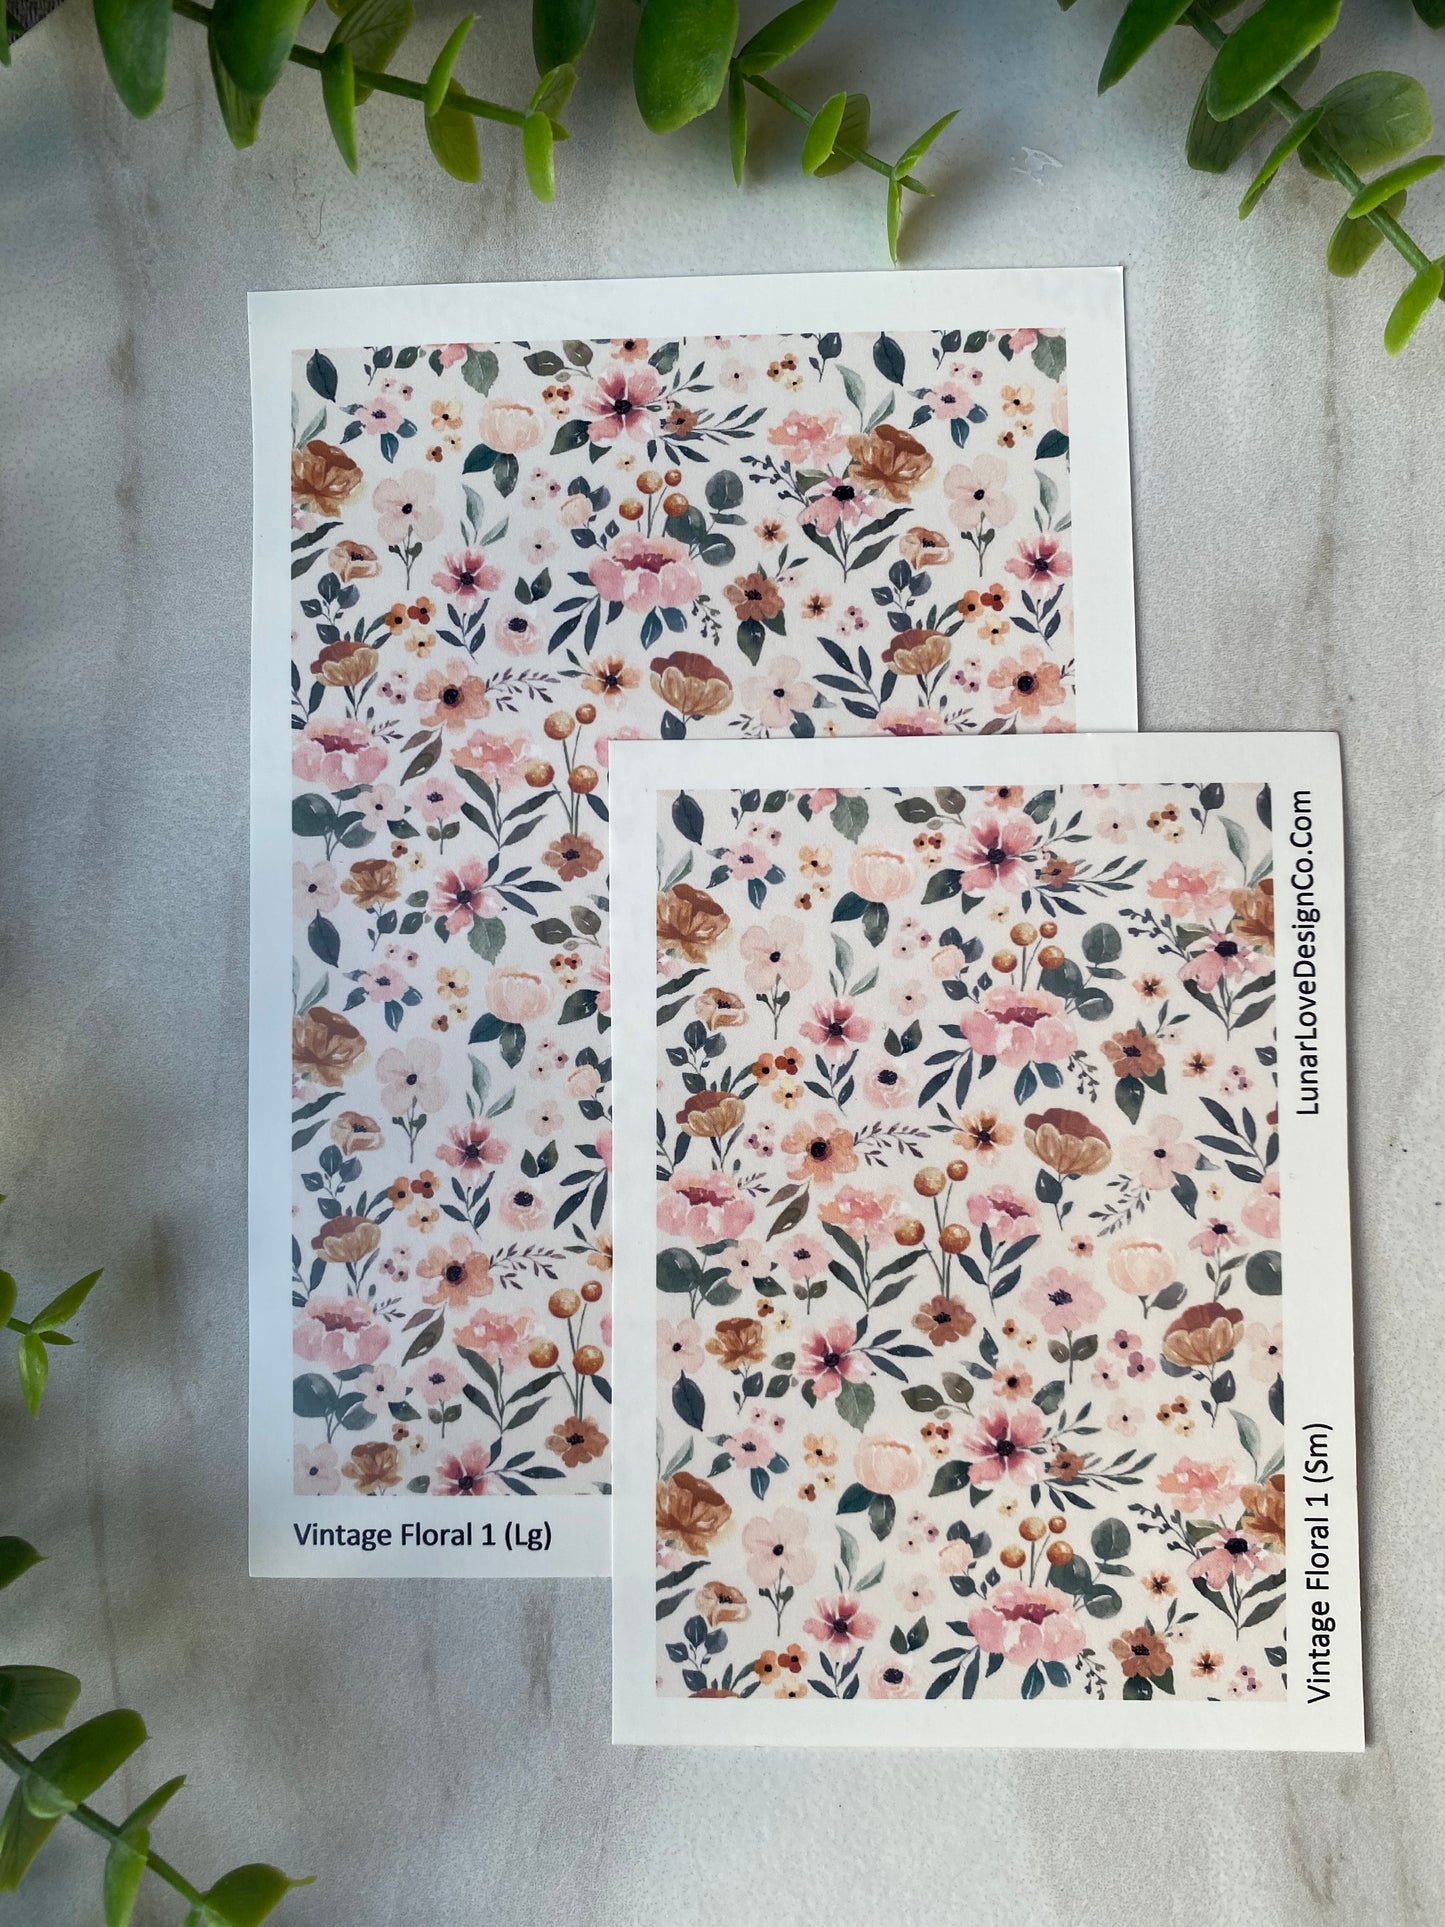 Vintage Floral 1 - Clay Tattoo Sheet